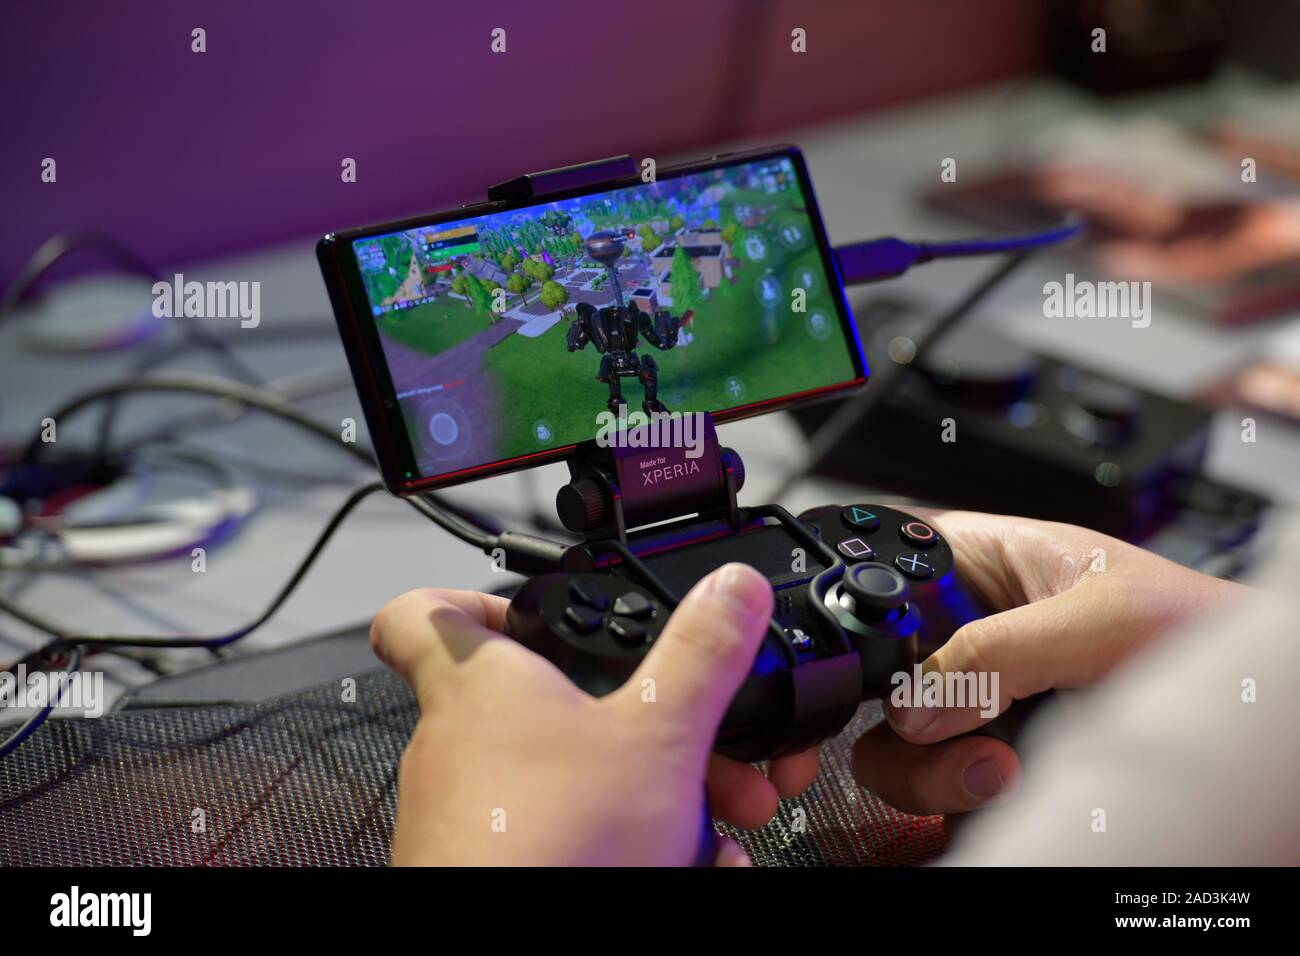 Sony Ps 4 High Resolution Stock Photography and Images - Alamy